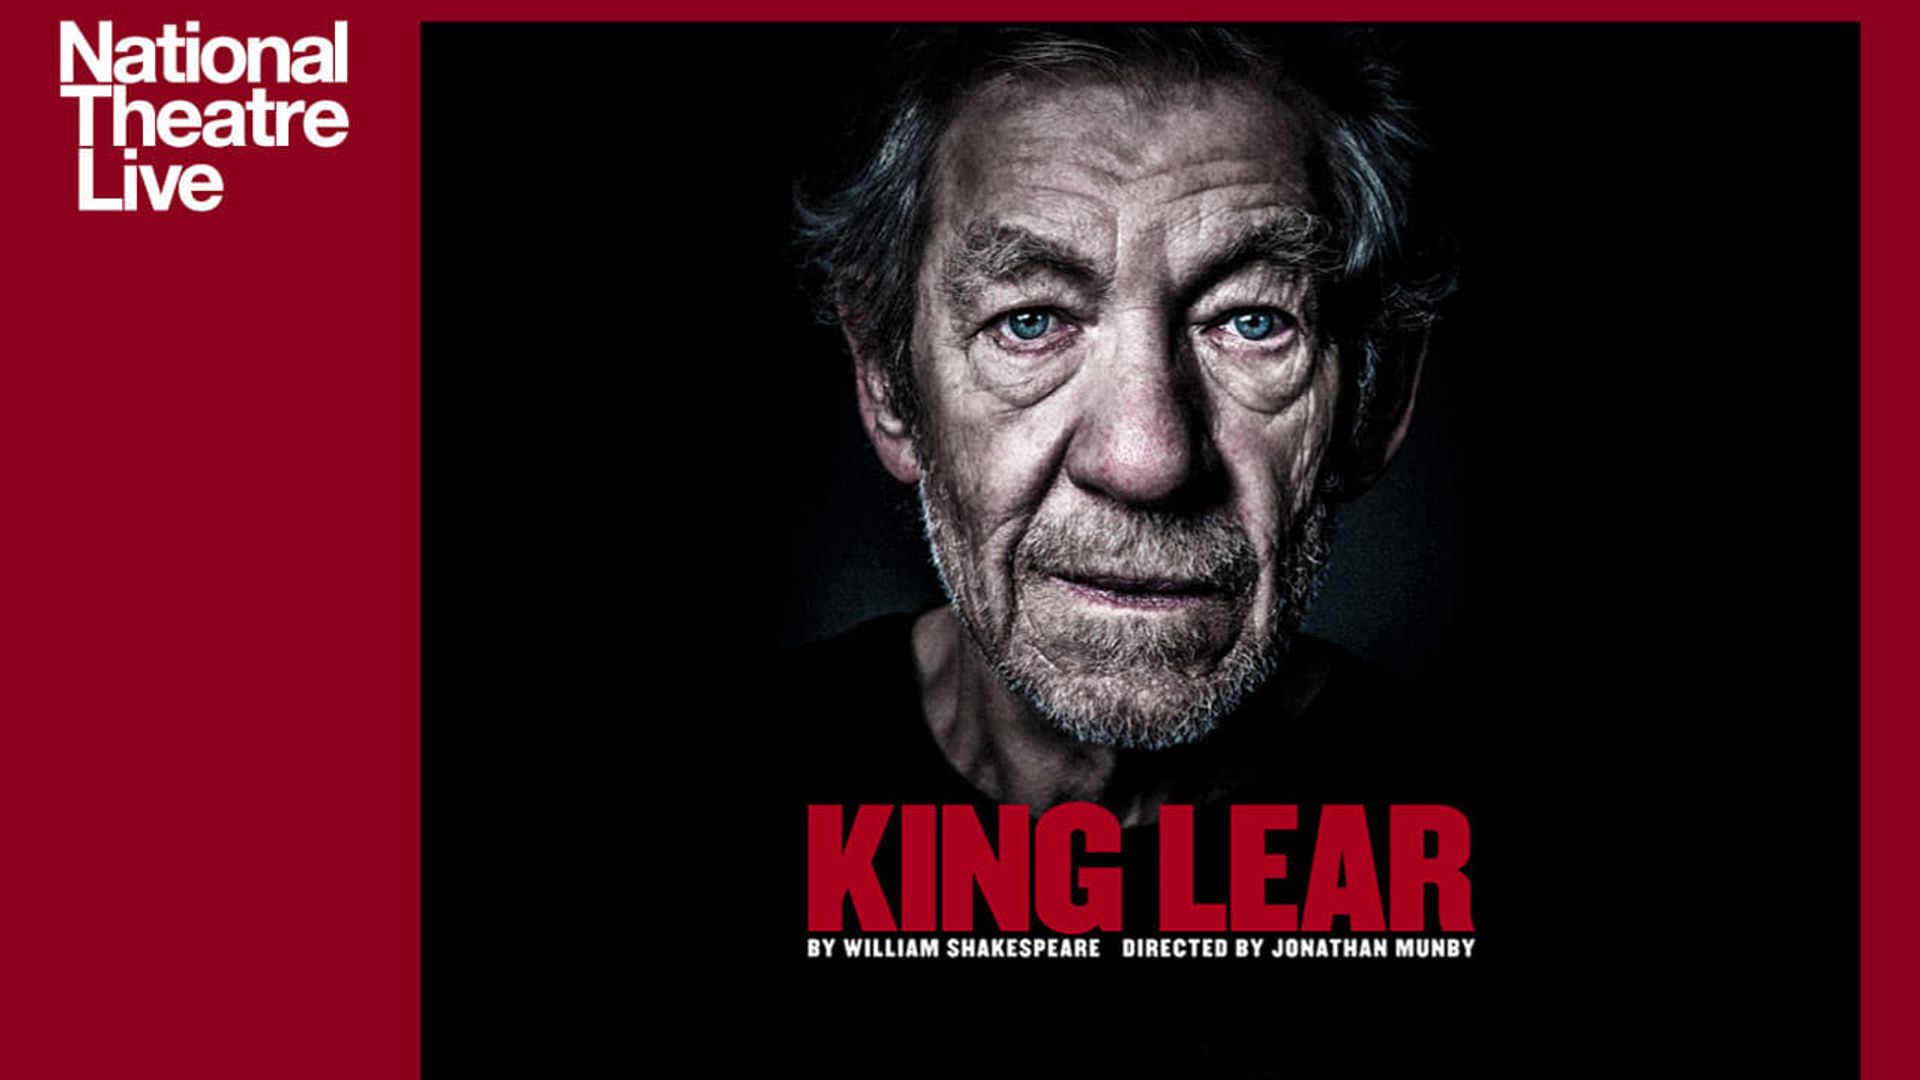 National Theatre Live: King Lear background